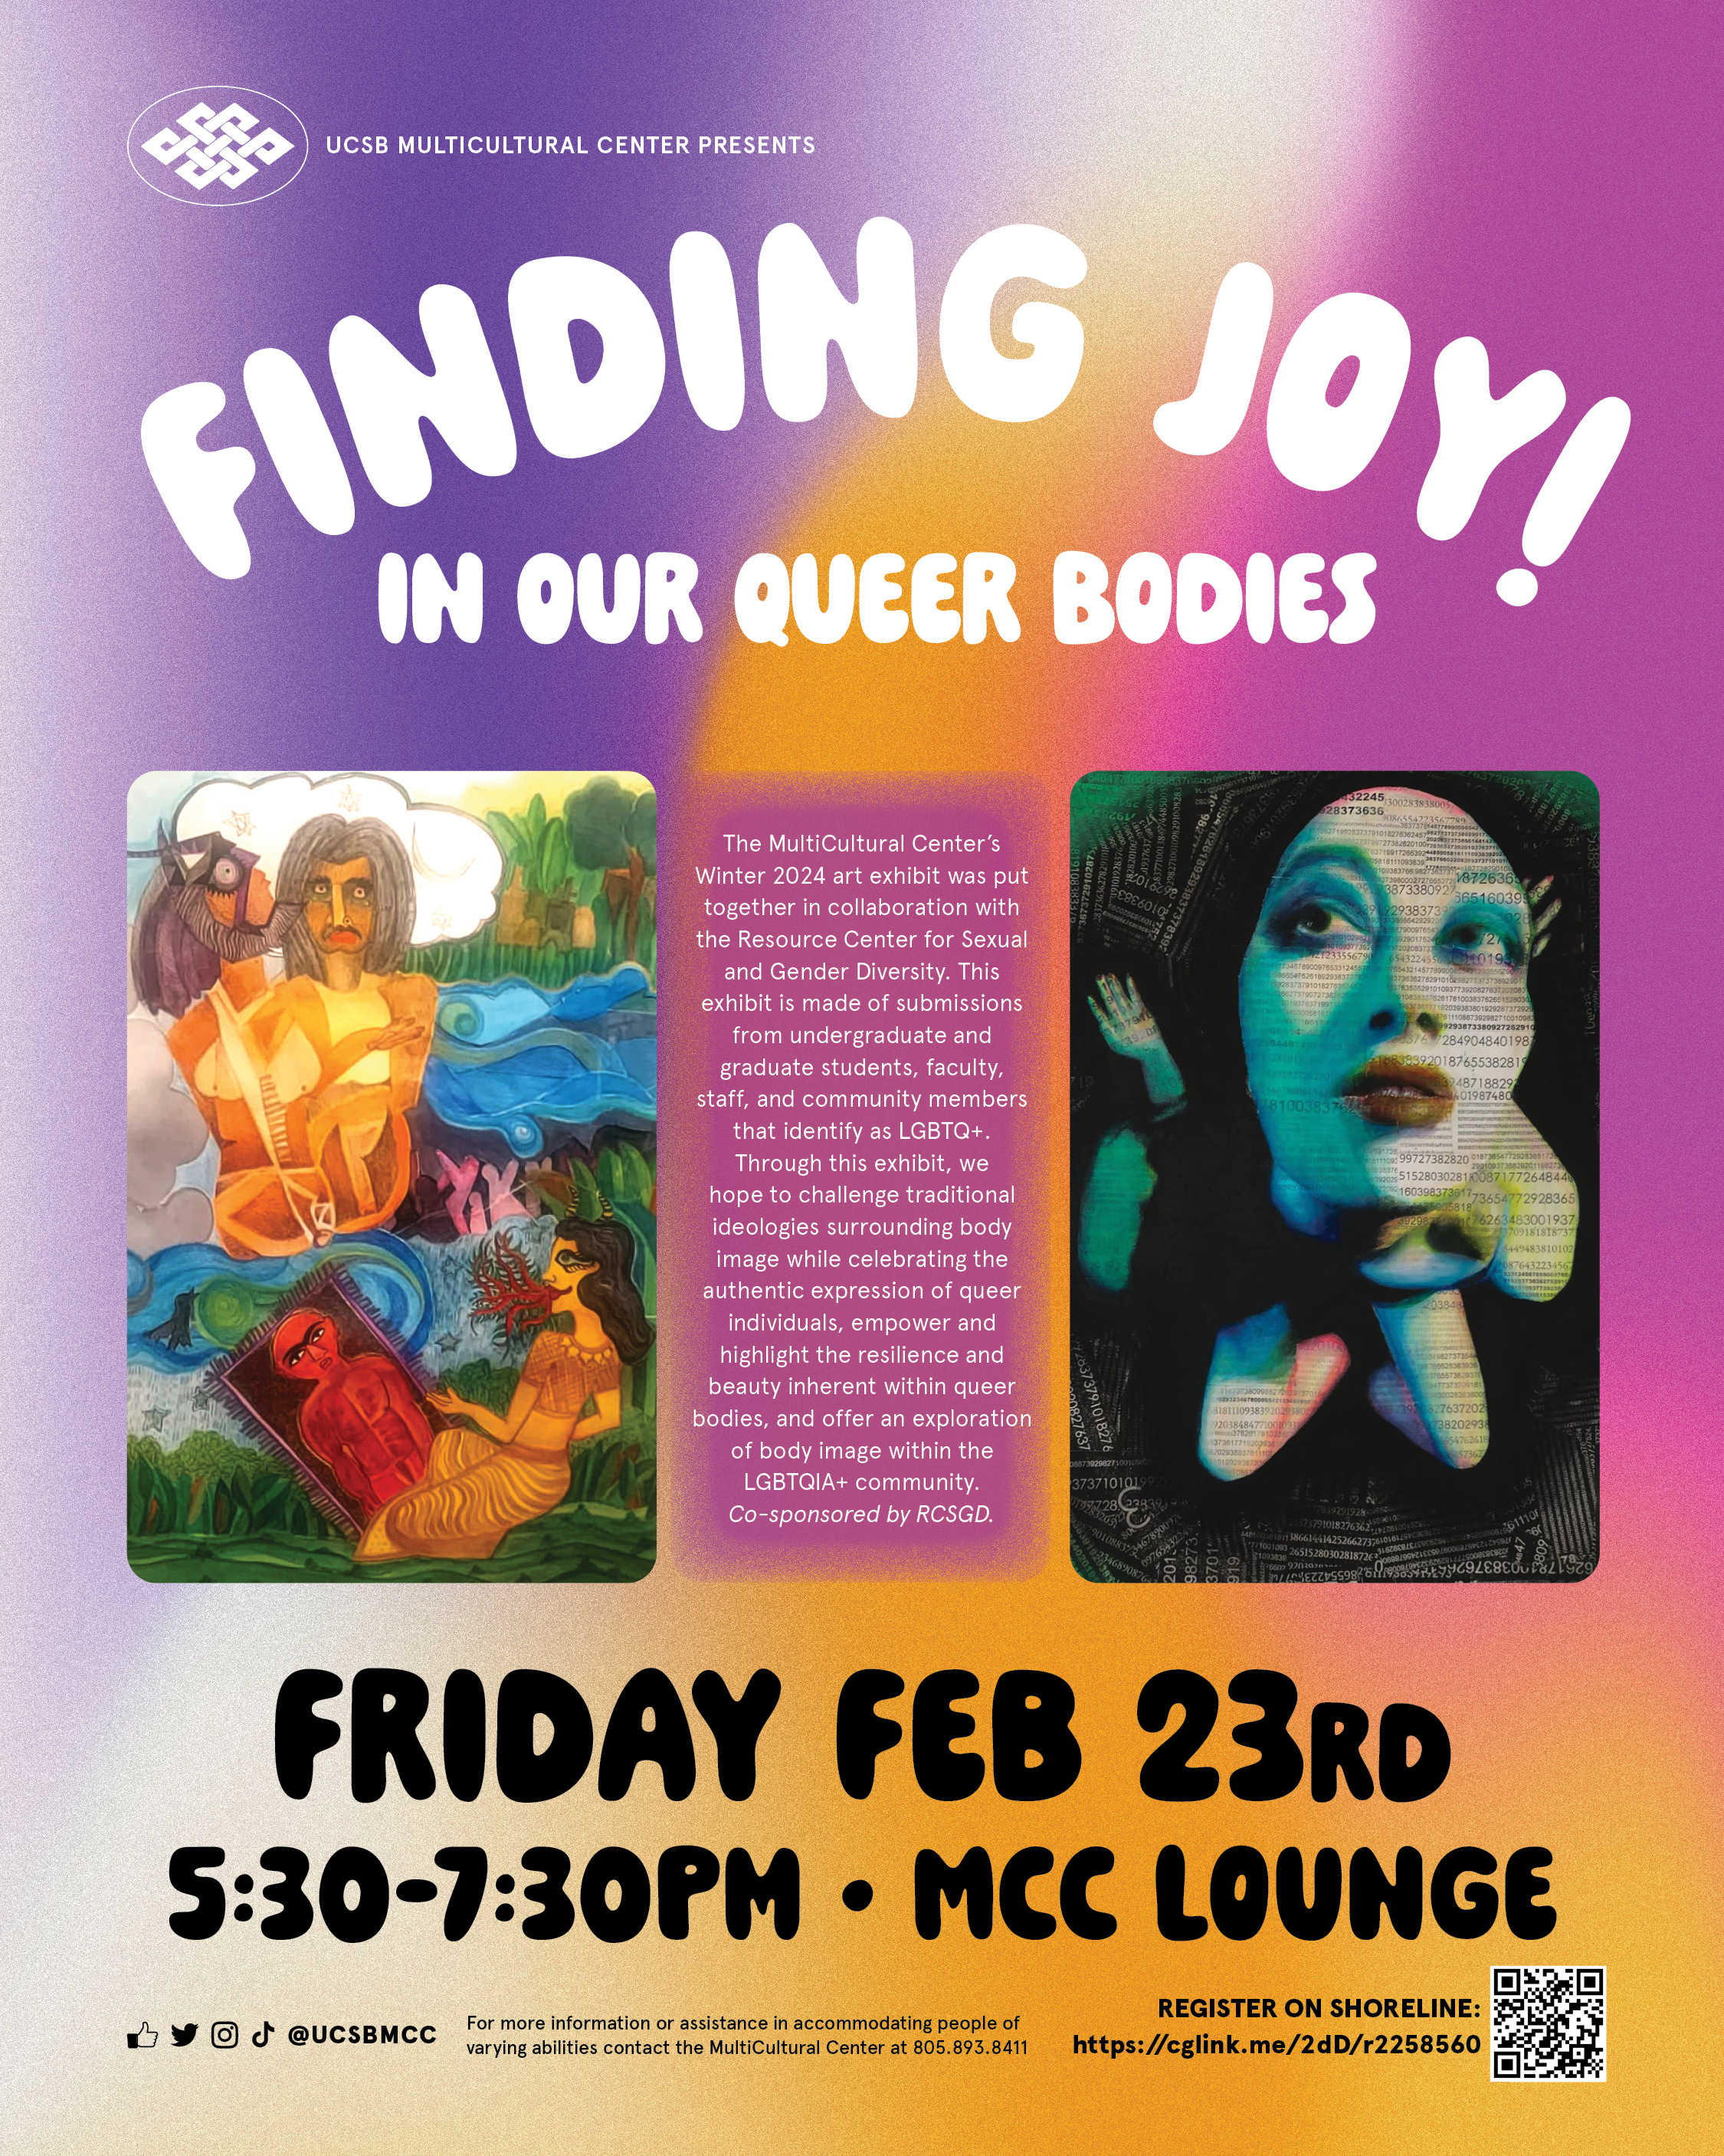 Finding Joy! in Our Queer Bodies